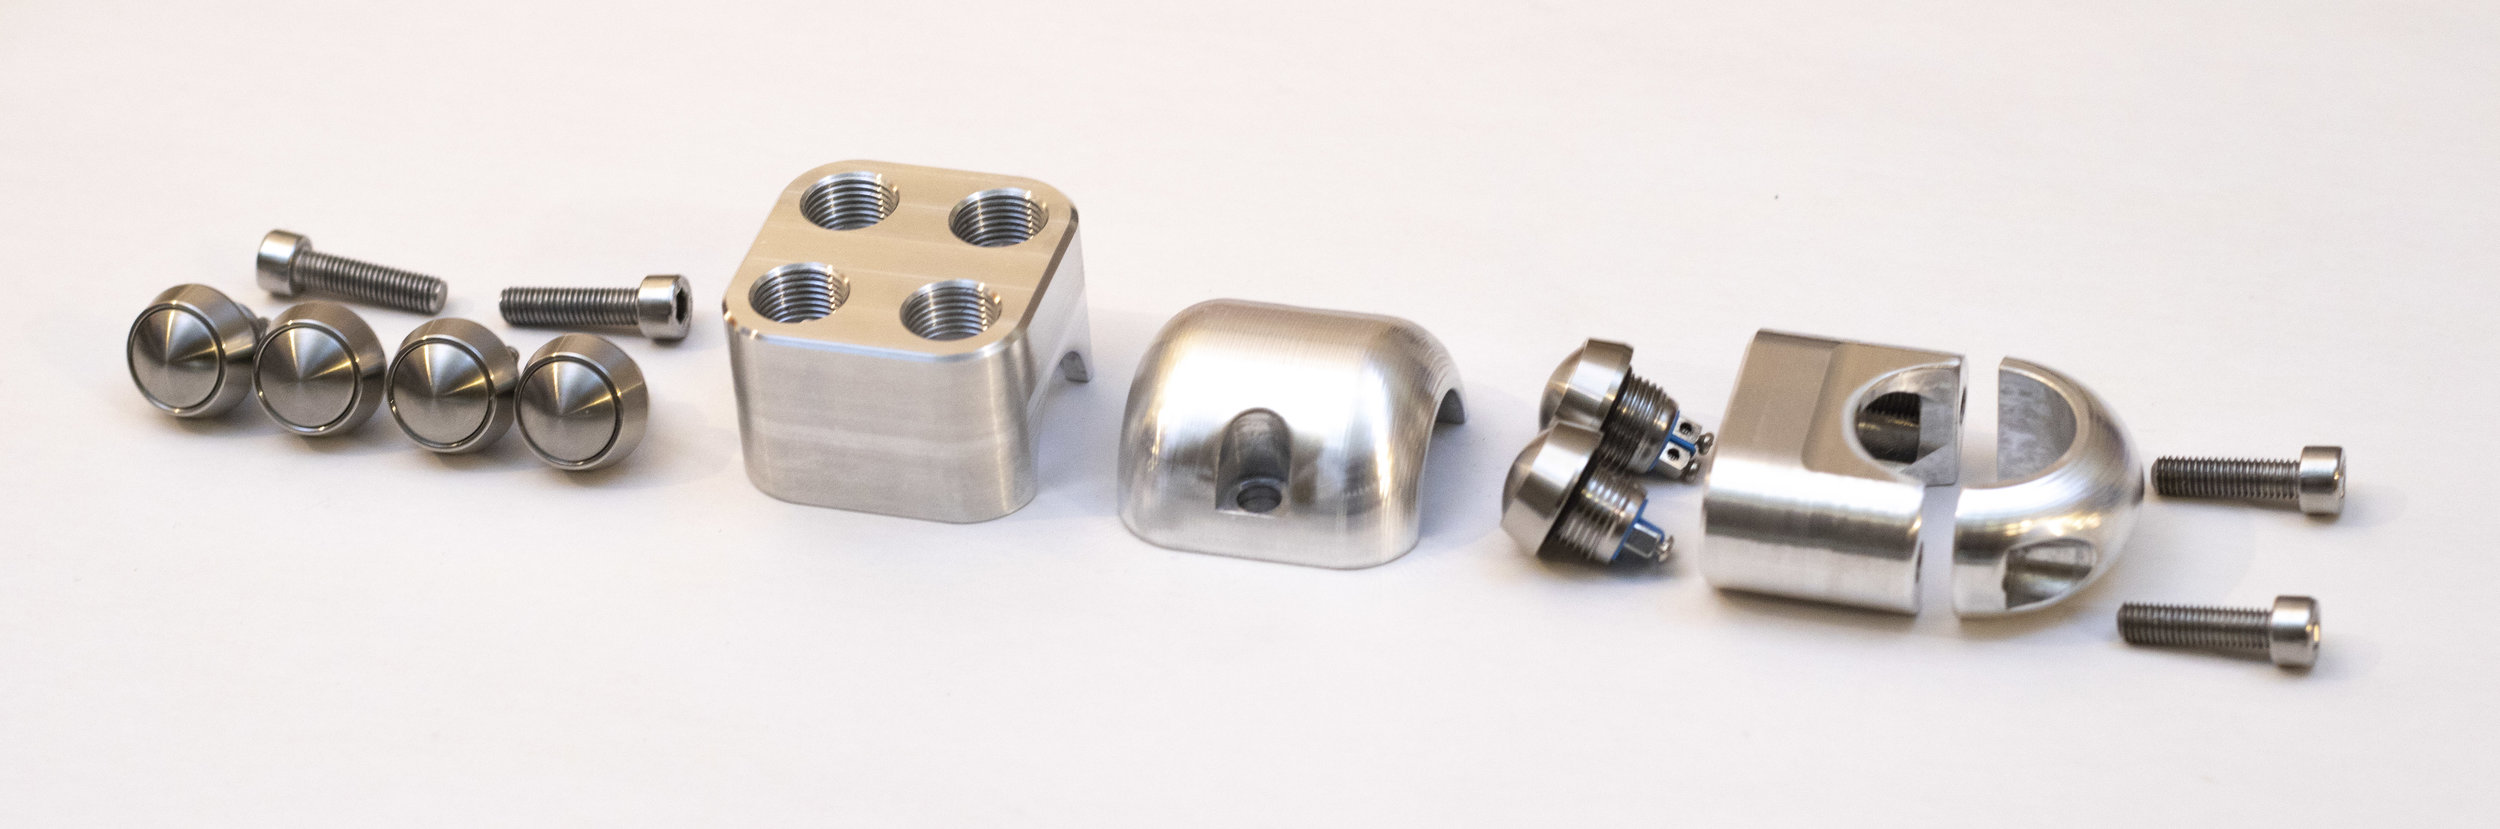 How Can CNC-Machined Motorcycle Parts Make Your Bike Look Even Cooler? -  Runsom Precision